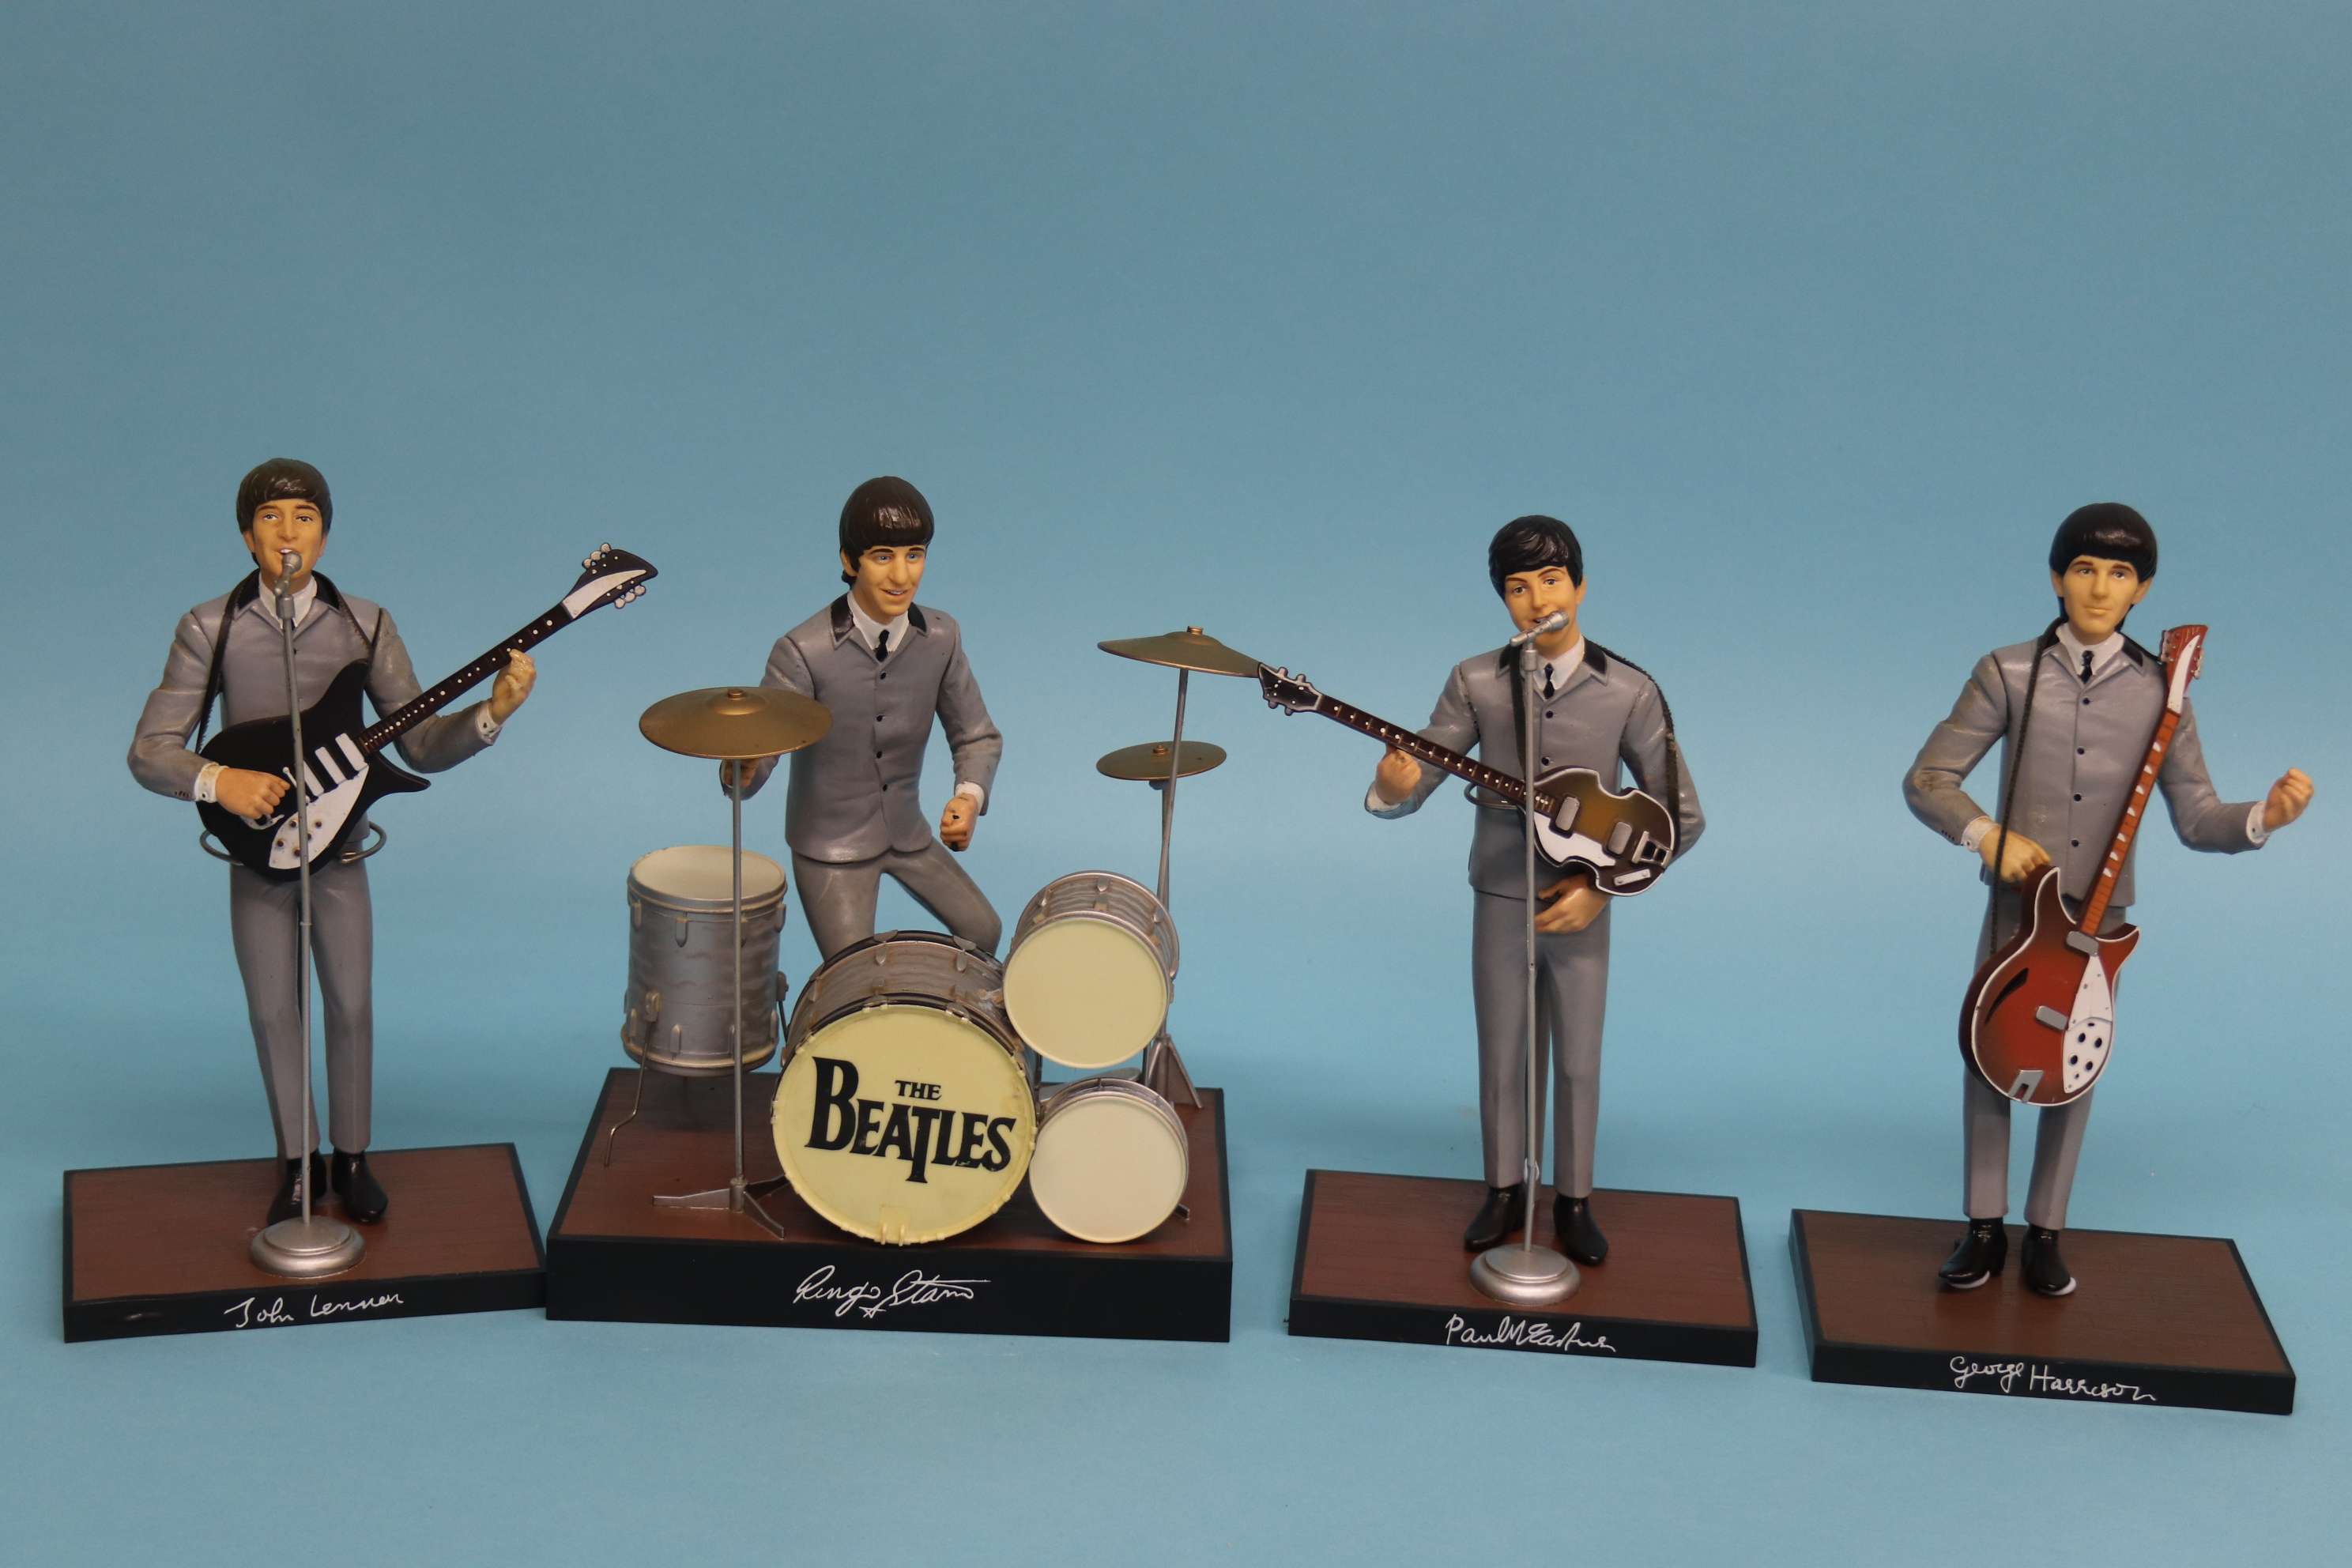 A figure group 'The Beatles'